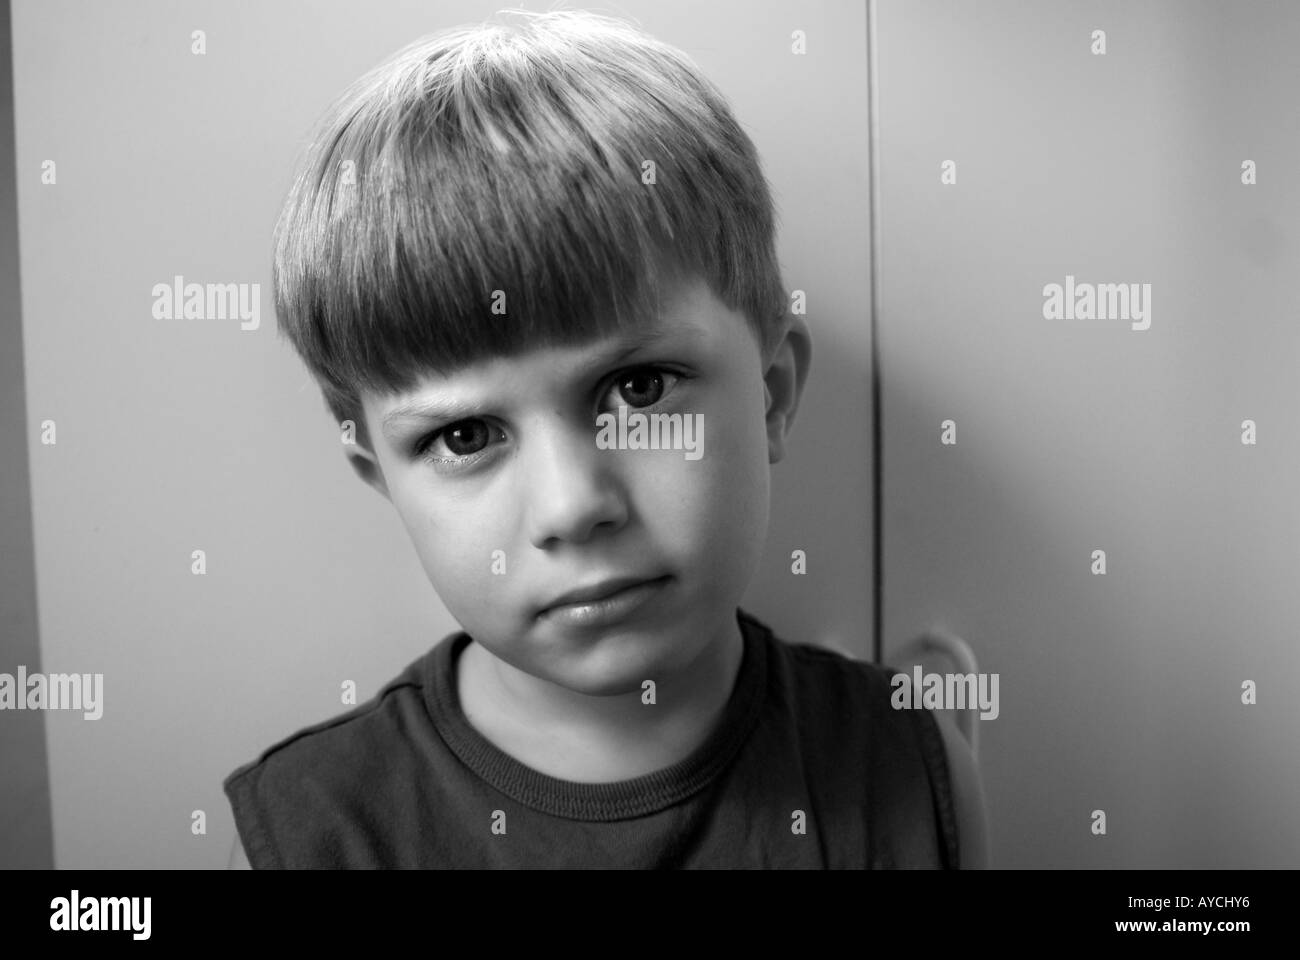 Small Boy looking serious Stock Photo